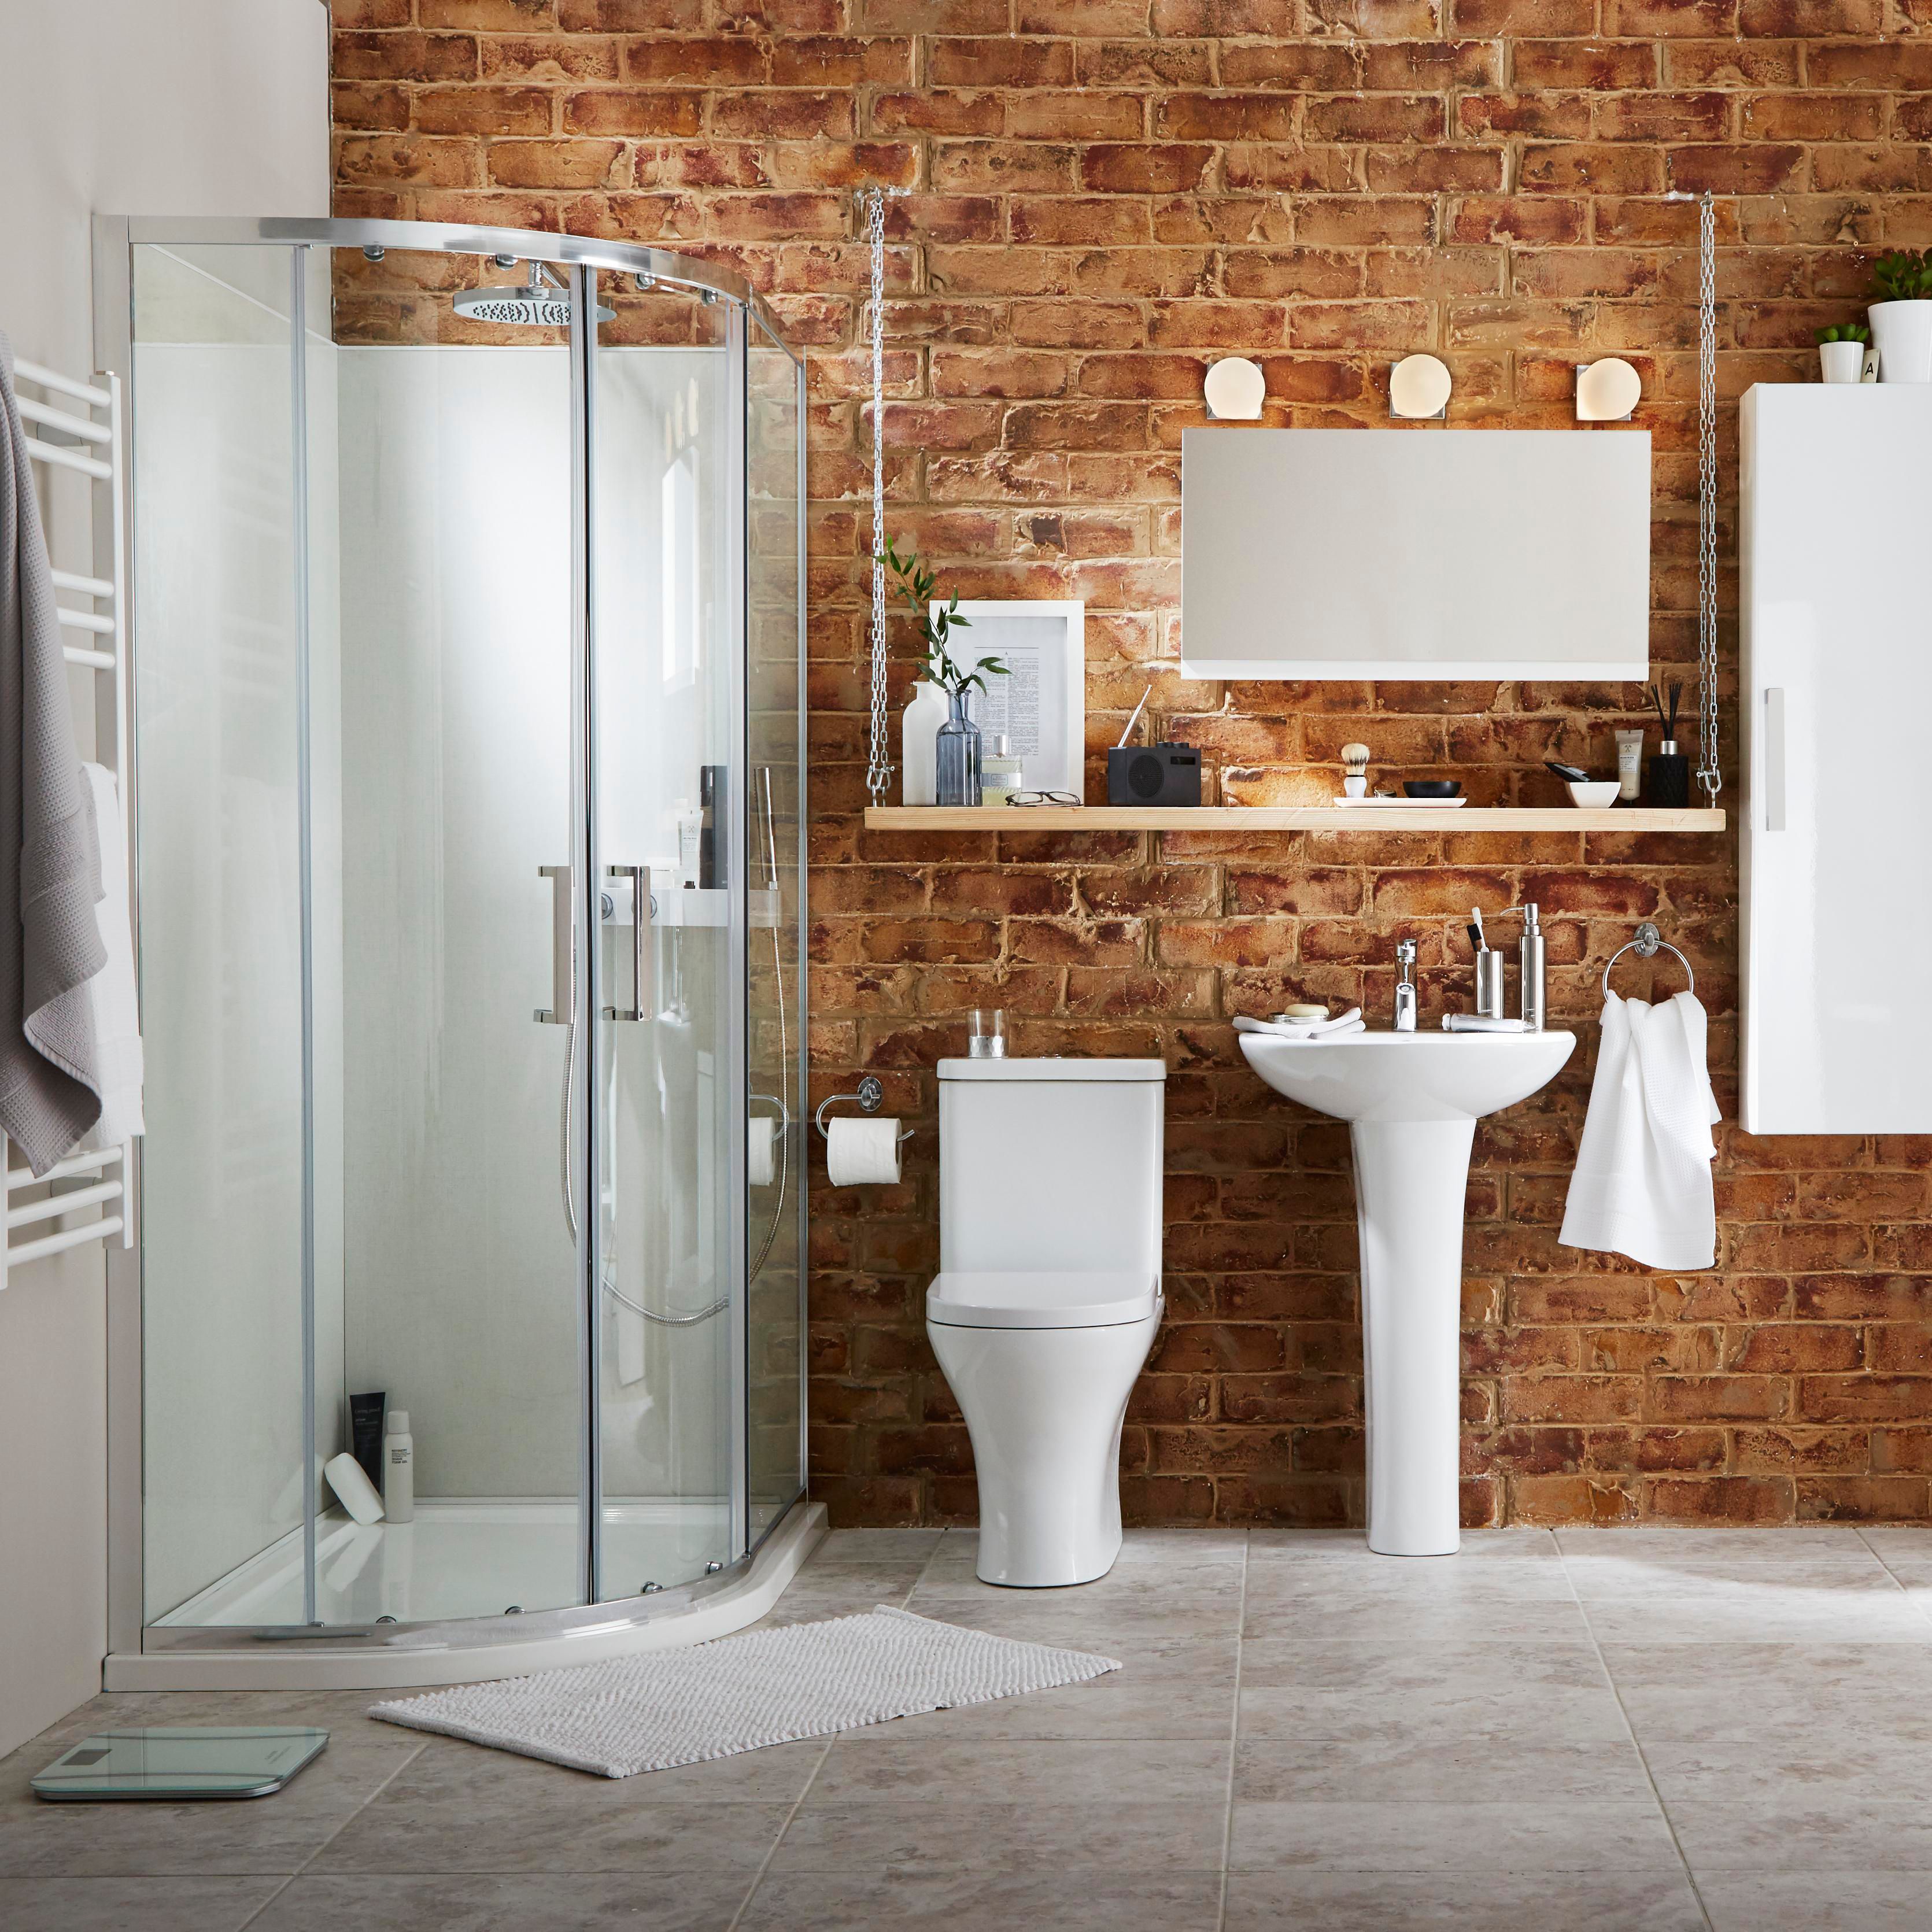 Cooke & Lewis Angelica Modern Close-coupled Toilet with Soft close seat